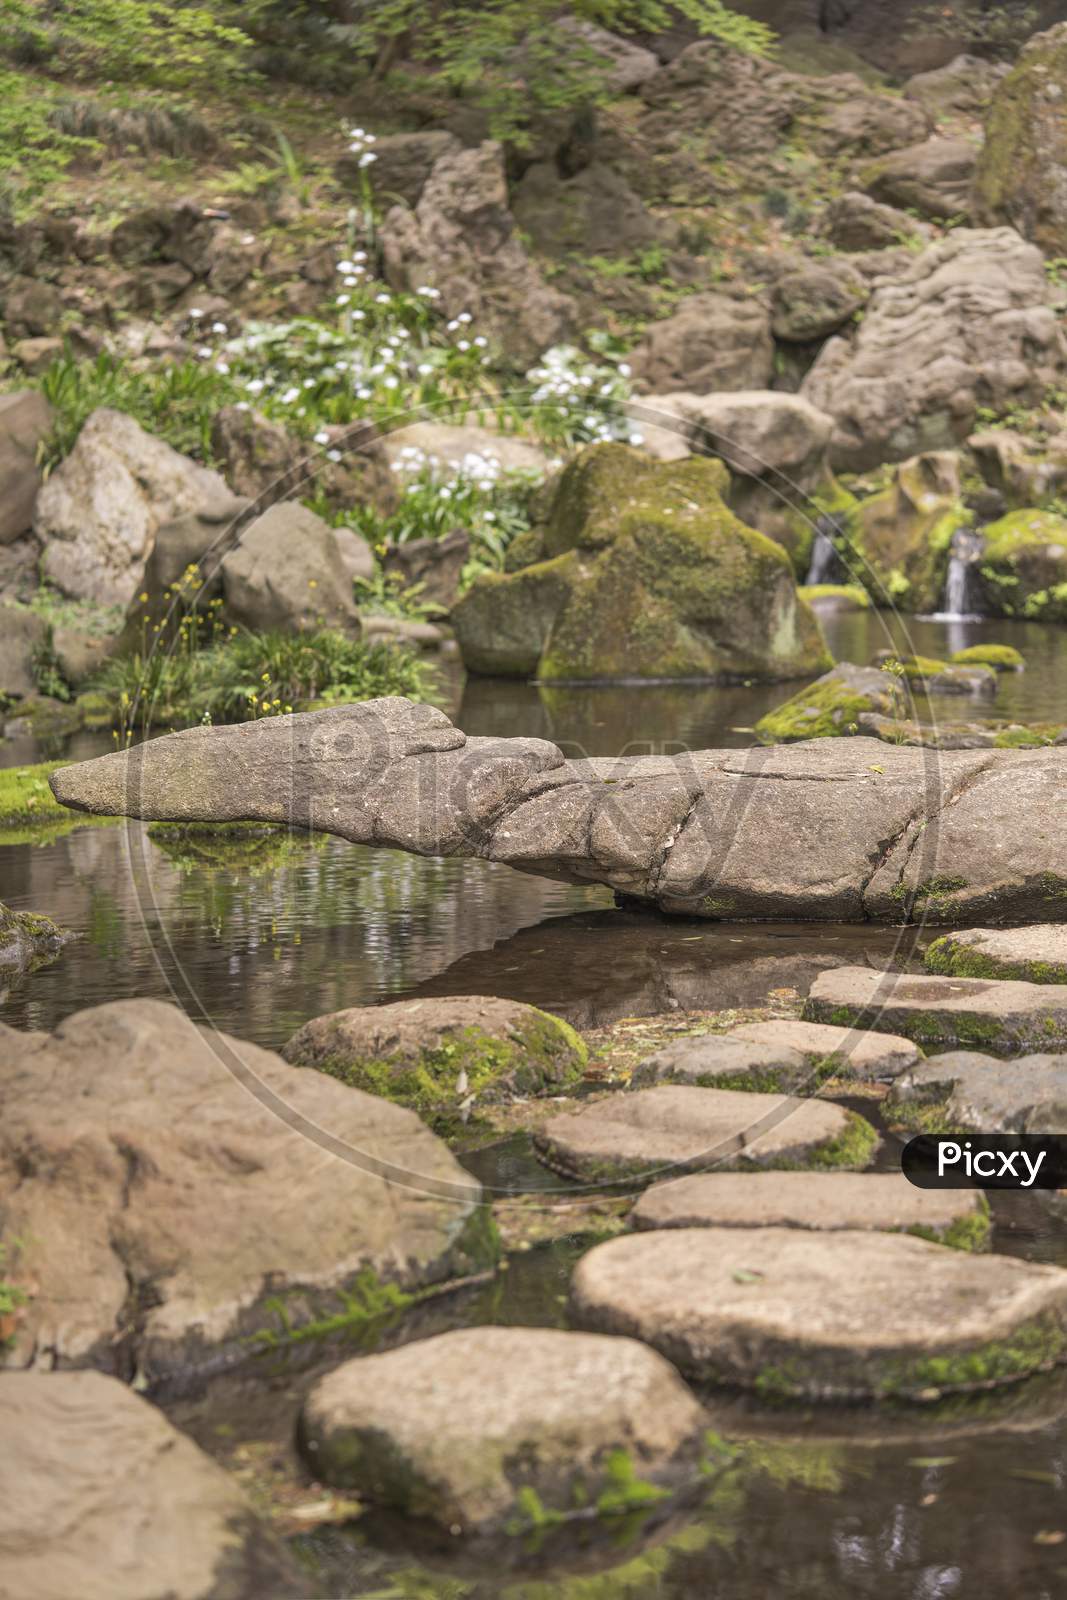 Stone Landscape Covered With Moss On The Pond Of Takimi Japanese Tea House Overlooking The Rikugien Park Garden In Bunkyo District, North Of Tokyo. The Park Was Created At The Beginning Of The 18Th Century.